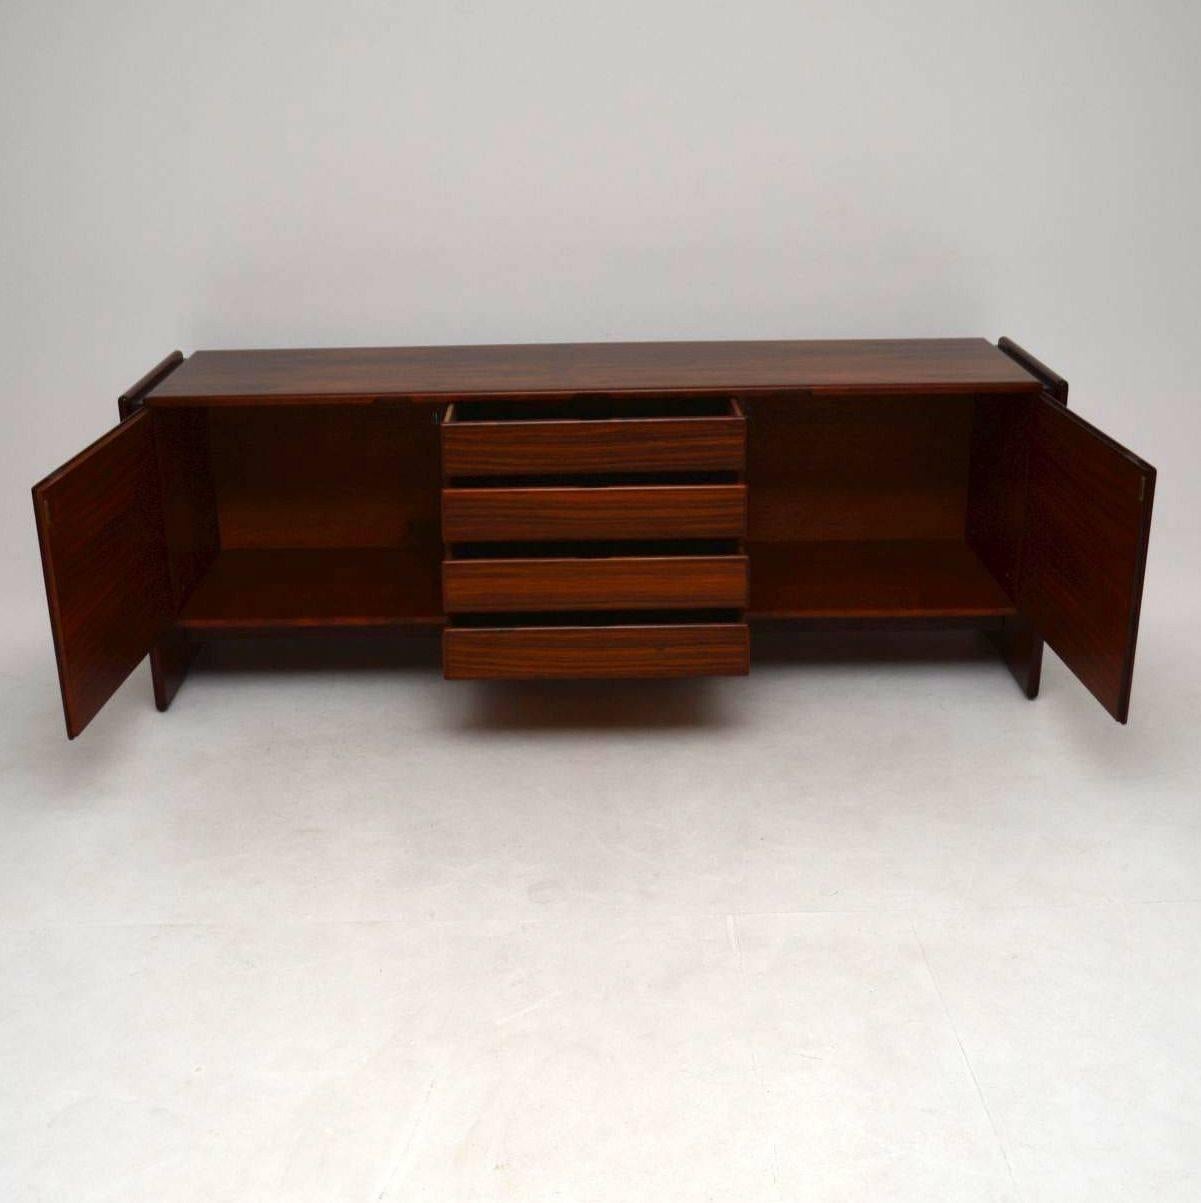 A beautiful and striking vintage sideboard, this was made in Denmark and dates from the 1960-1970s. The quality is amazing, the color and grain patterns are really beautiful. We have had this stripped and re-polished to a very high standard, the